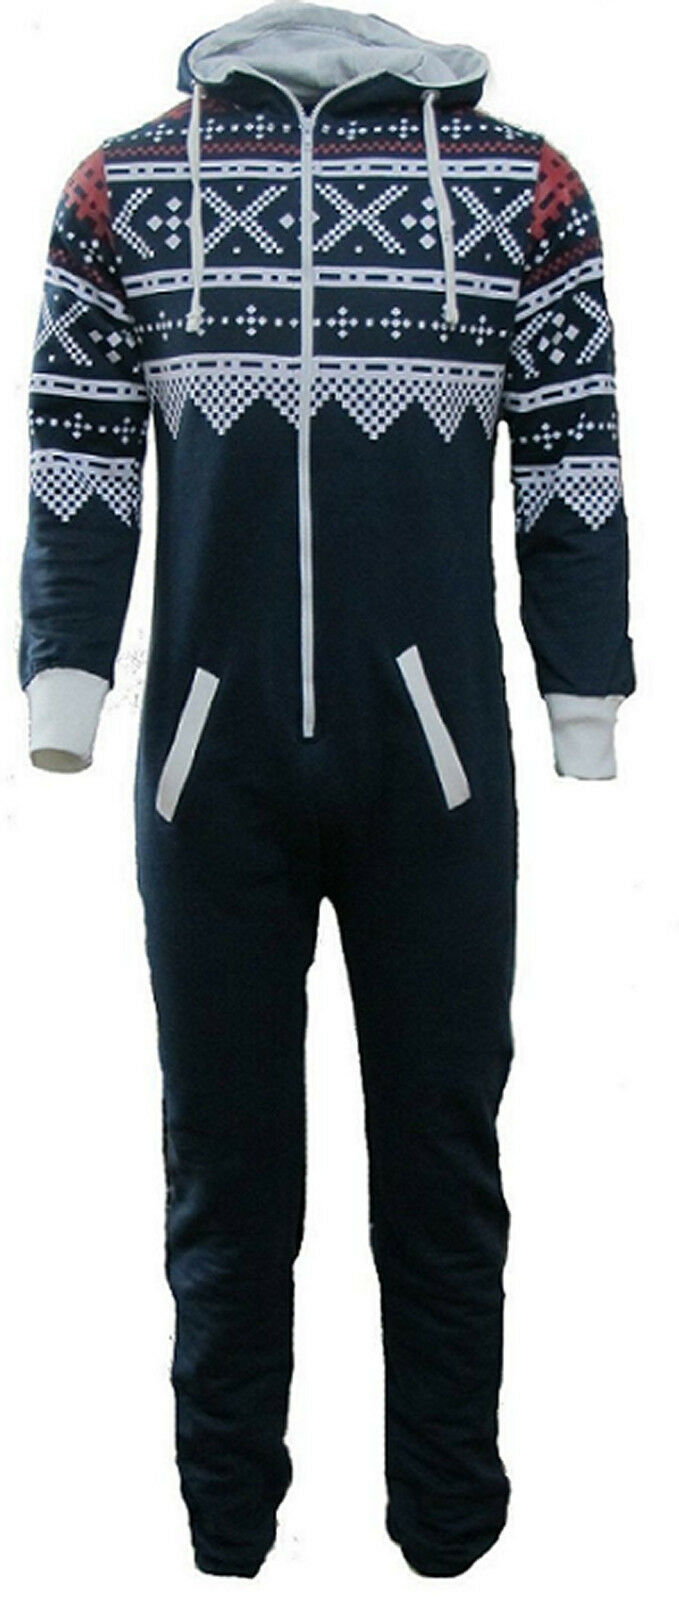 Black Aztec Onesie With Blue Design. These Have A White Cotton Lined Hood With The Rest Of The Onesie Being Fleece.They Have Elasticated Ribbed Cuffs And Front Pockets.The Zip At The Front Goes From The Neck To Just Below The Waist. These Are A Lose Fit Onesie. Sizes 2XL To 4XL Available.